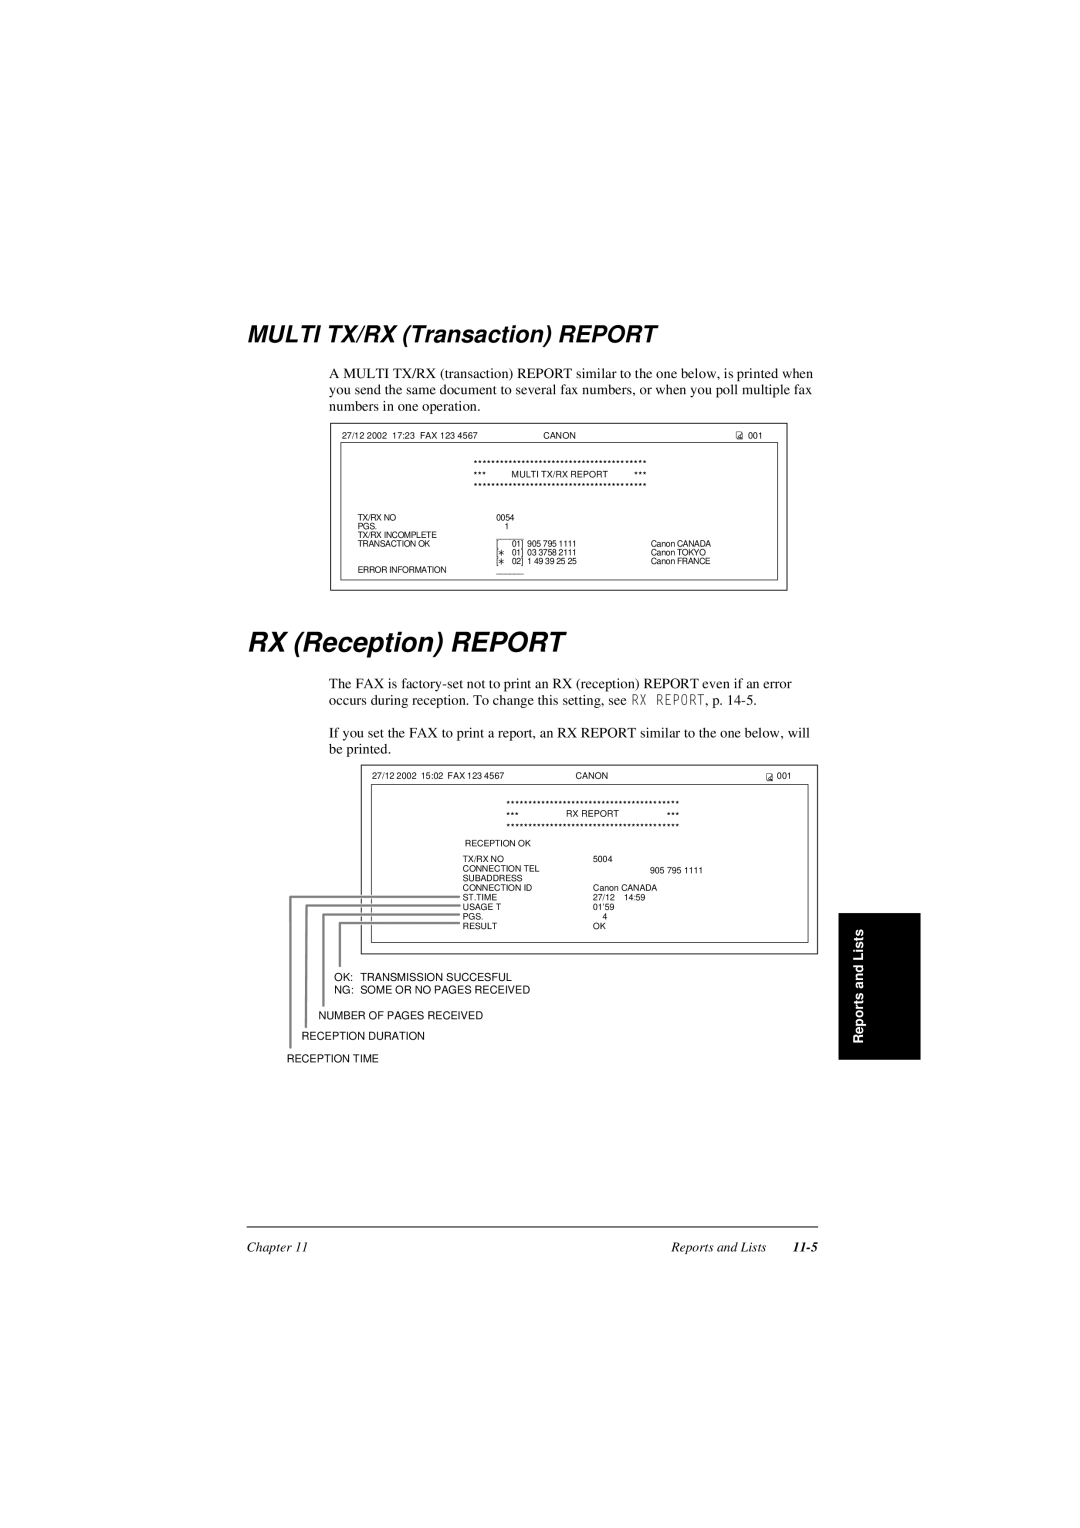 Canon L240, L290 manual MULTI TX/RX Transaction REPORT, Reports and Lists, Chapter, 11-5 